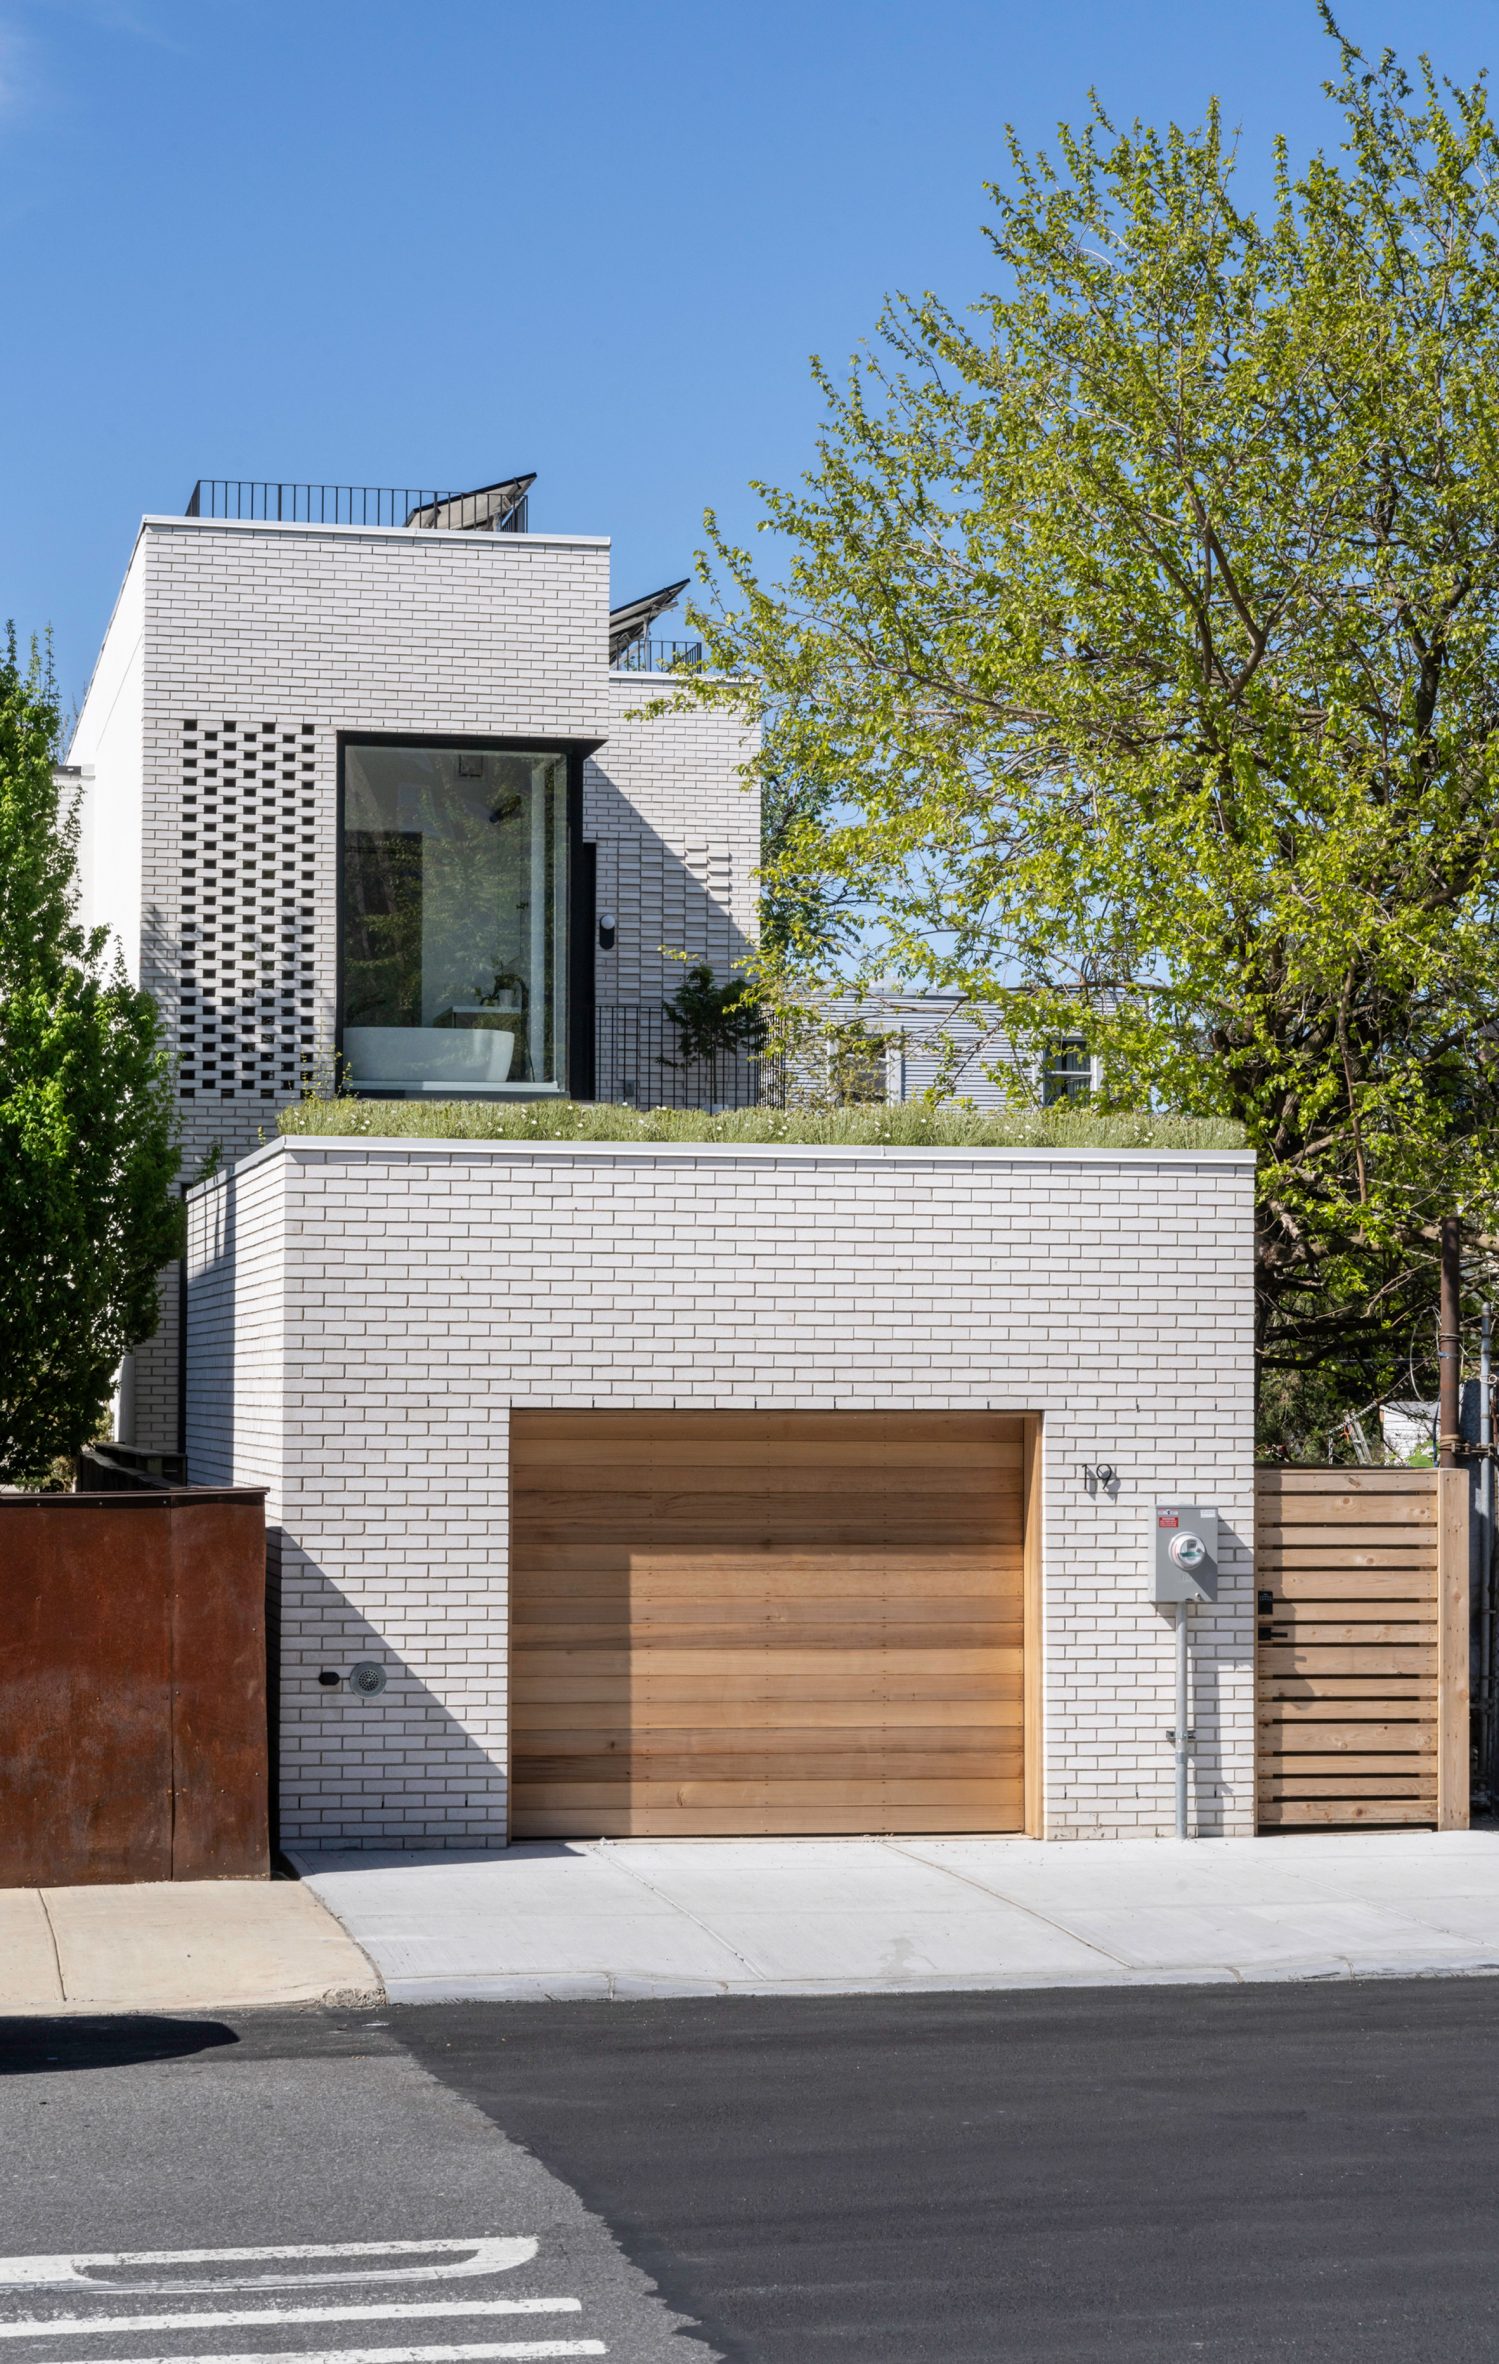 Garage with roof garden in front of white-brick townhouse in New York City